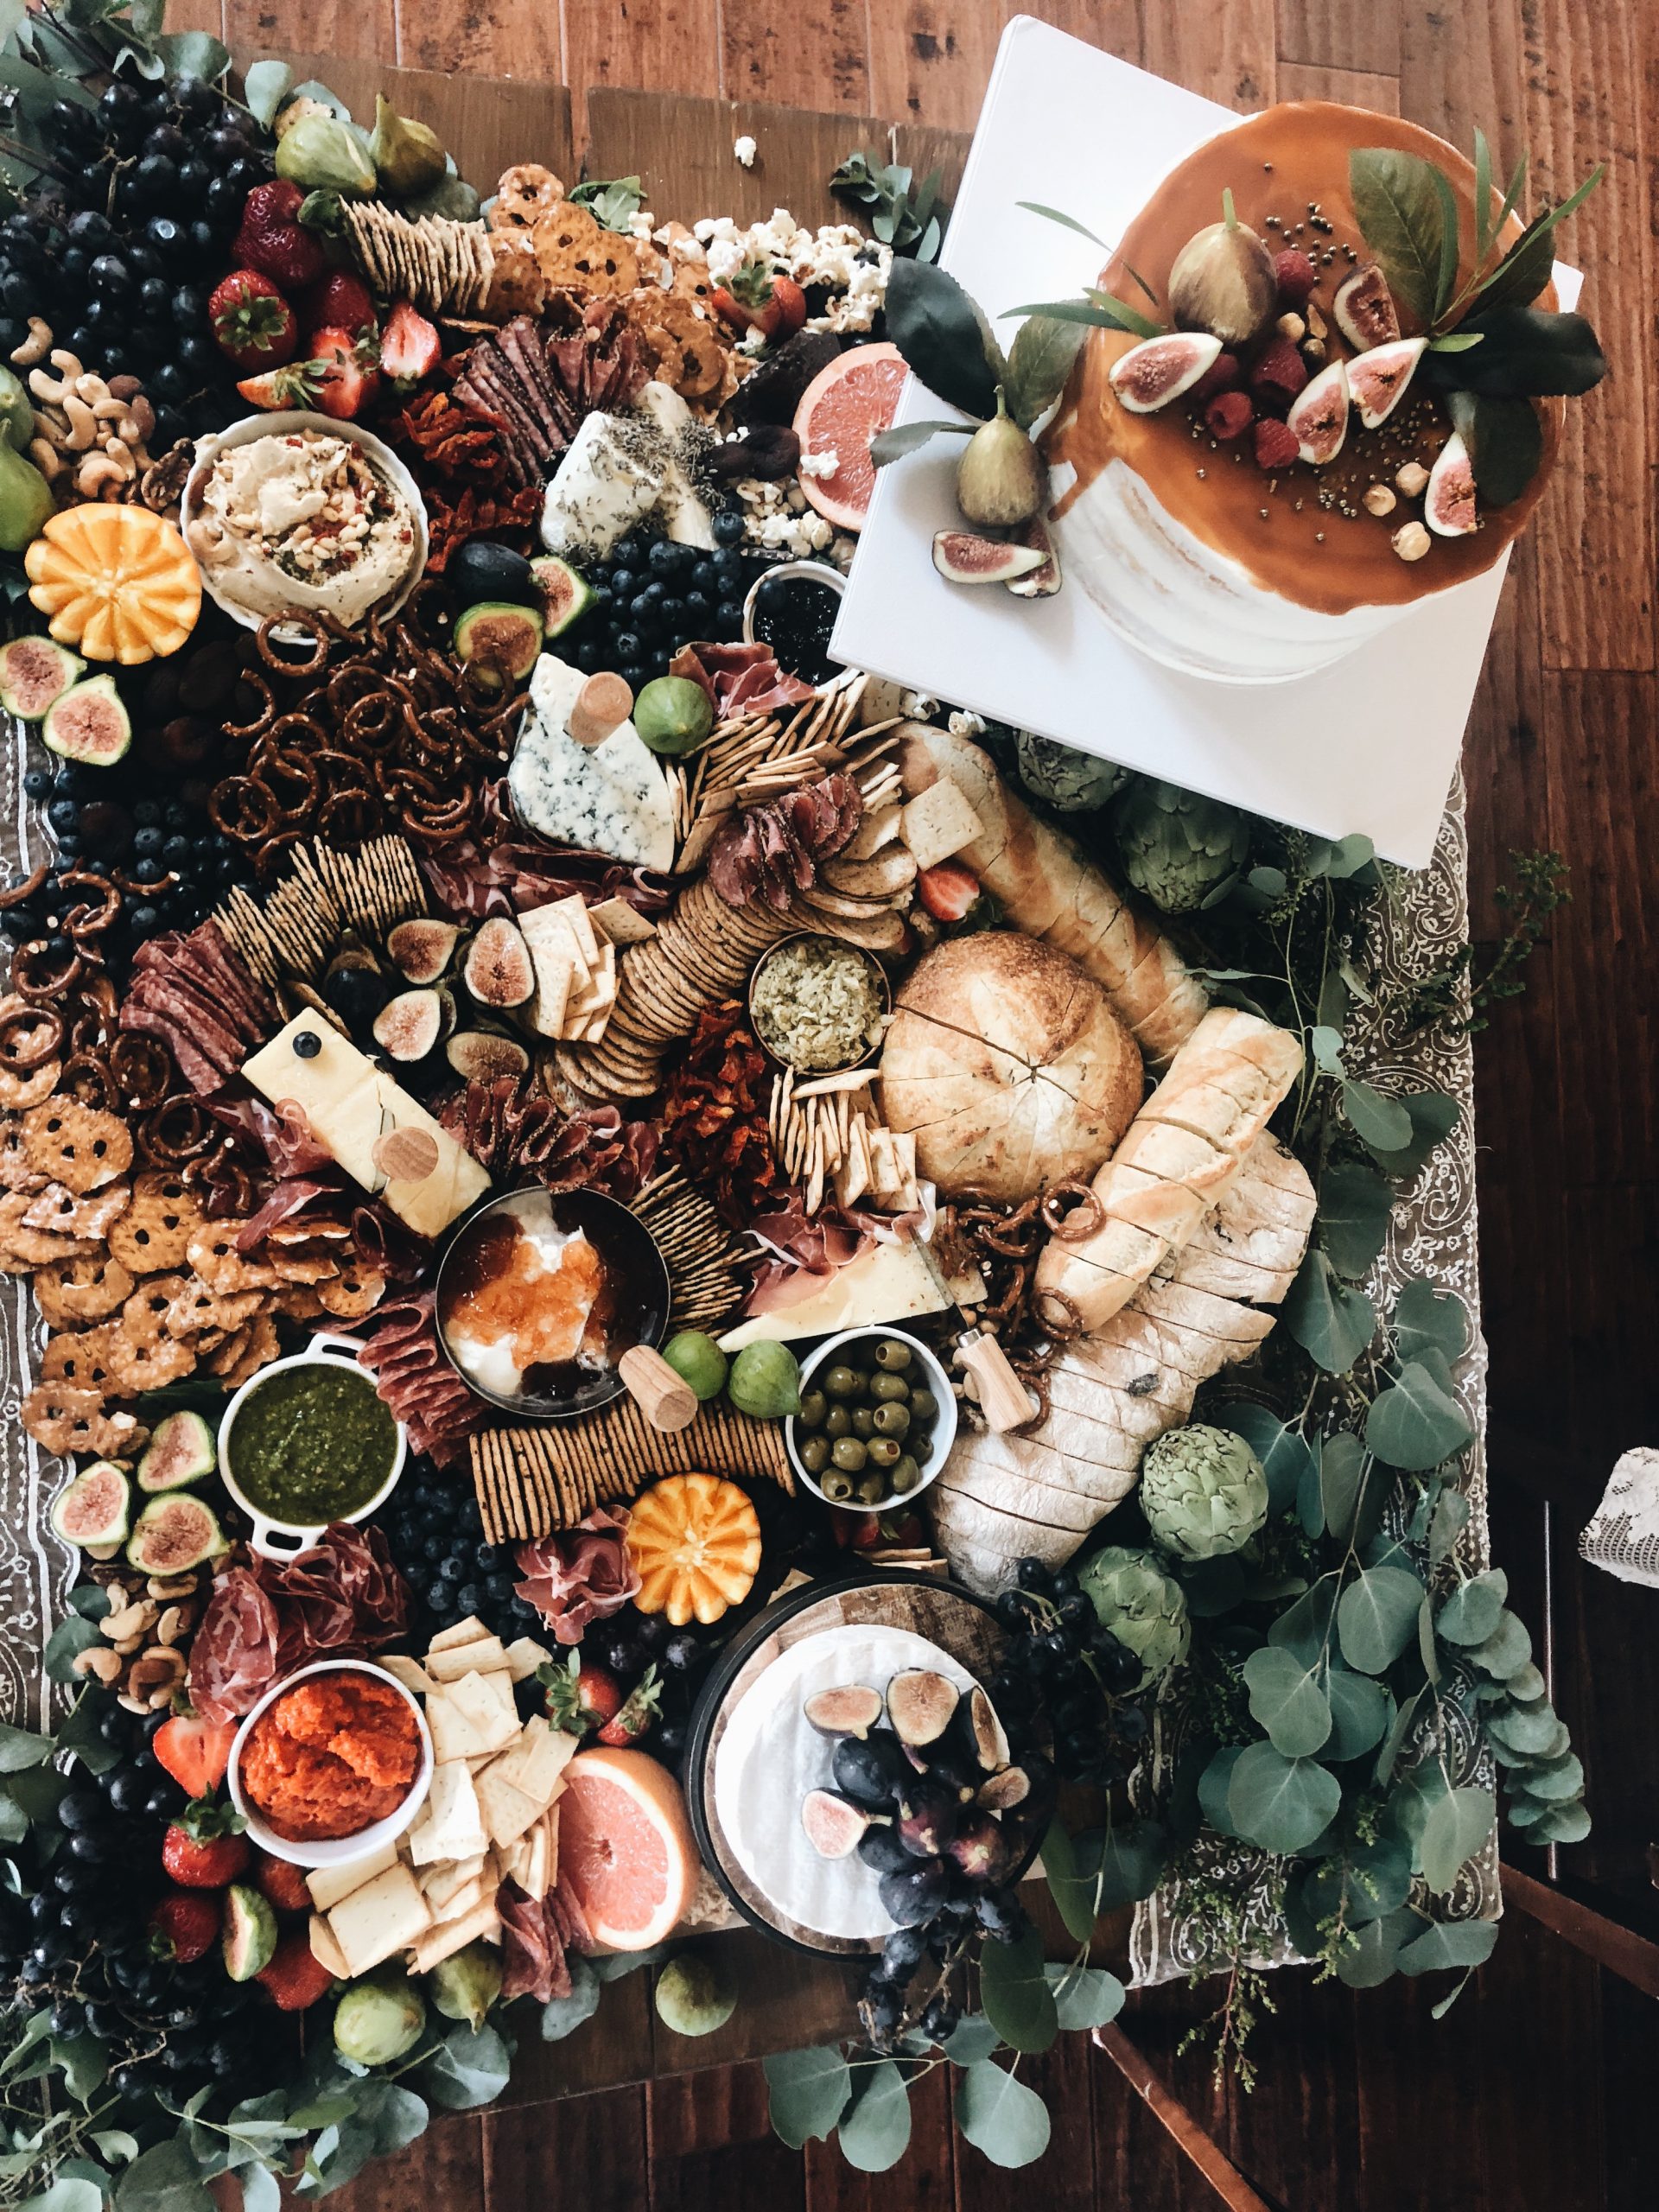 large table filled with various meat, cheese, breads, and fruit